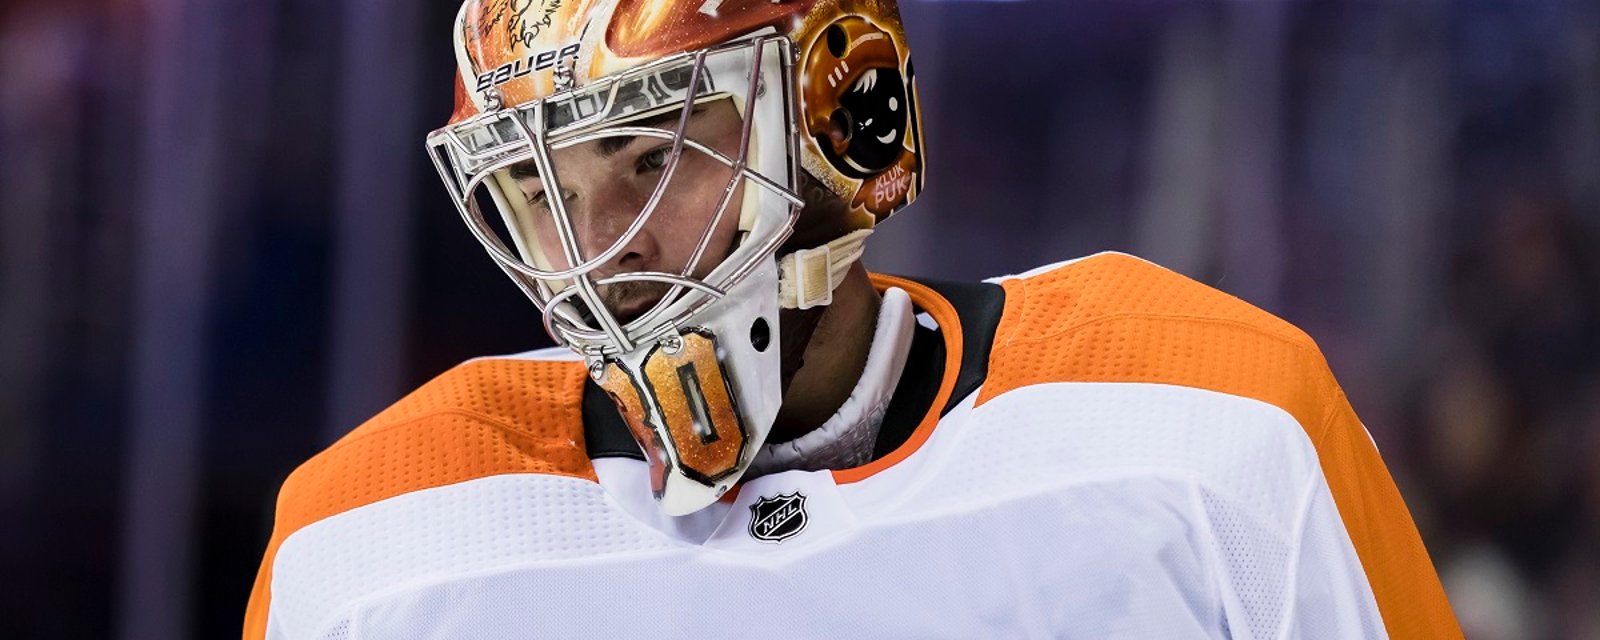 Breaking: Flyers forced to call up a goaltender after two injuries in goal.